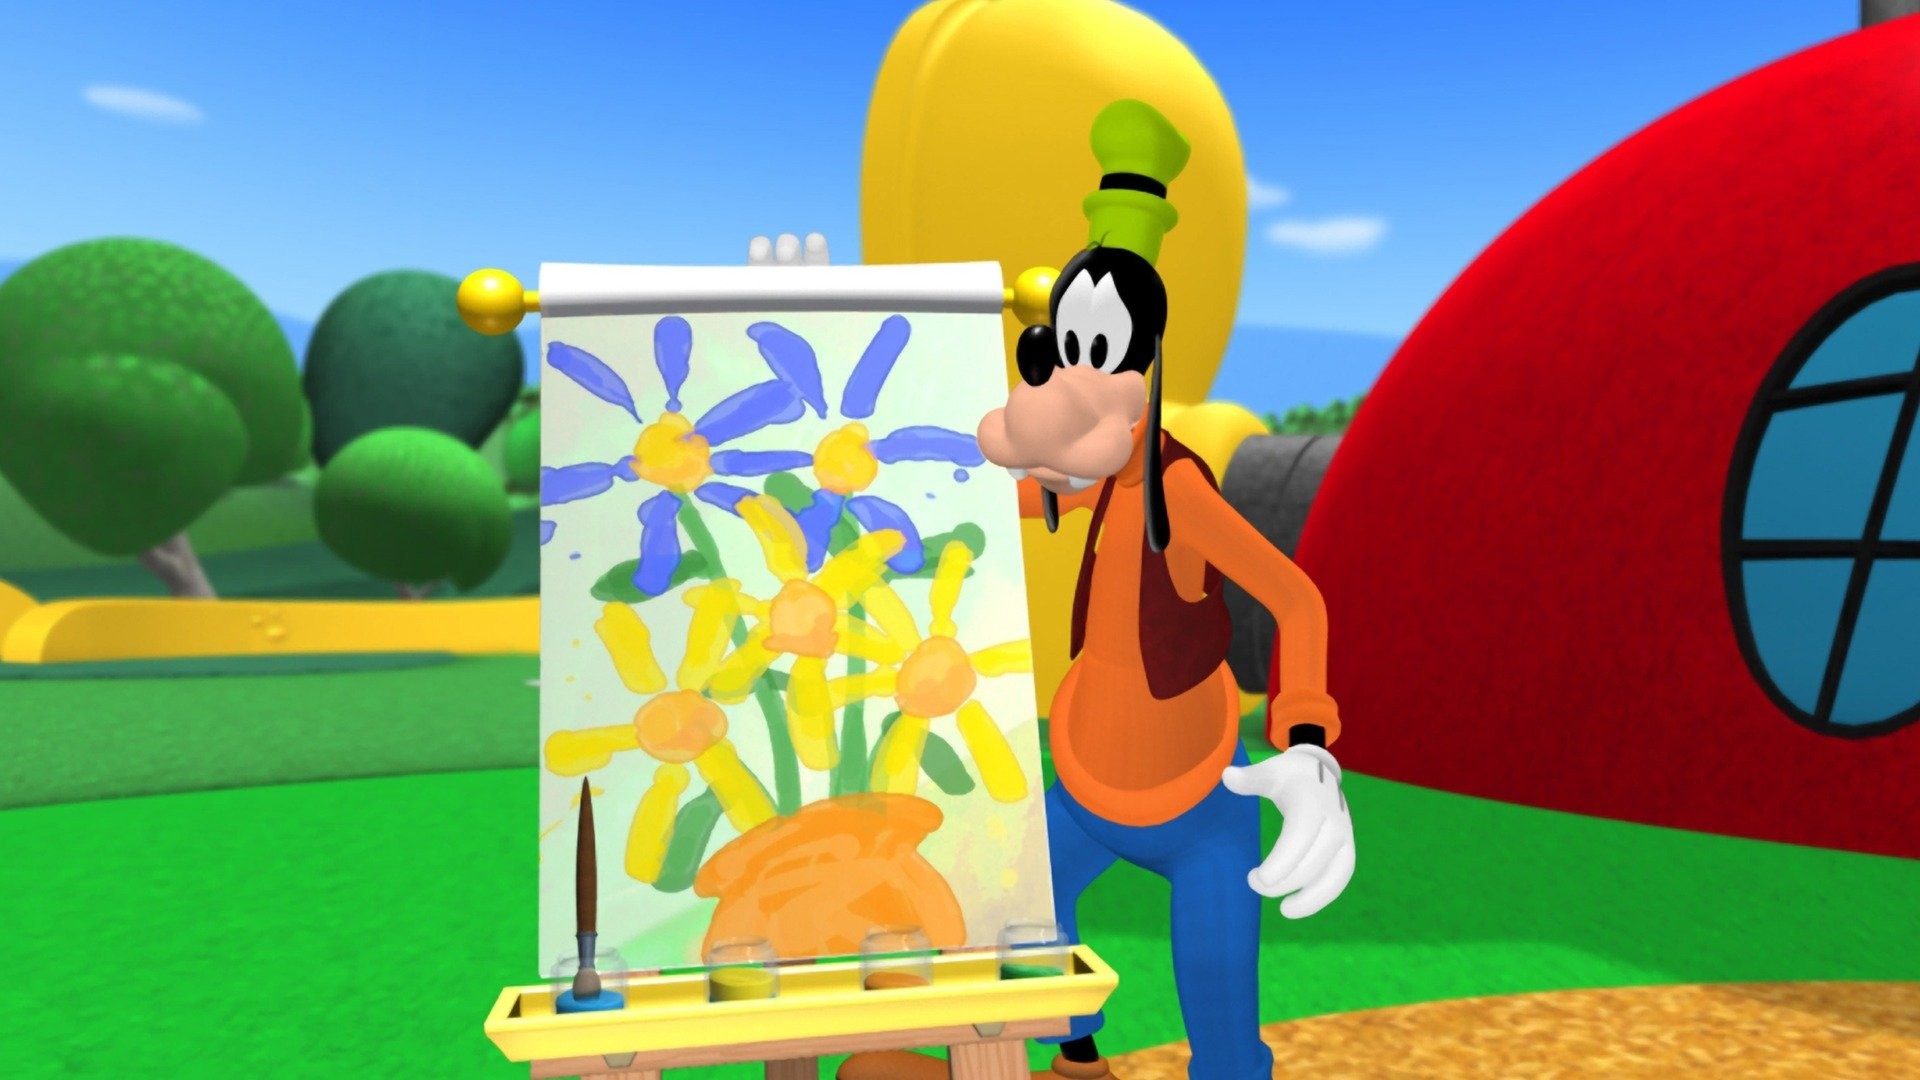 Mickey Mouse Clubhouse: Season 1, Episode 13 - Rotten Tomatoes